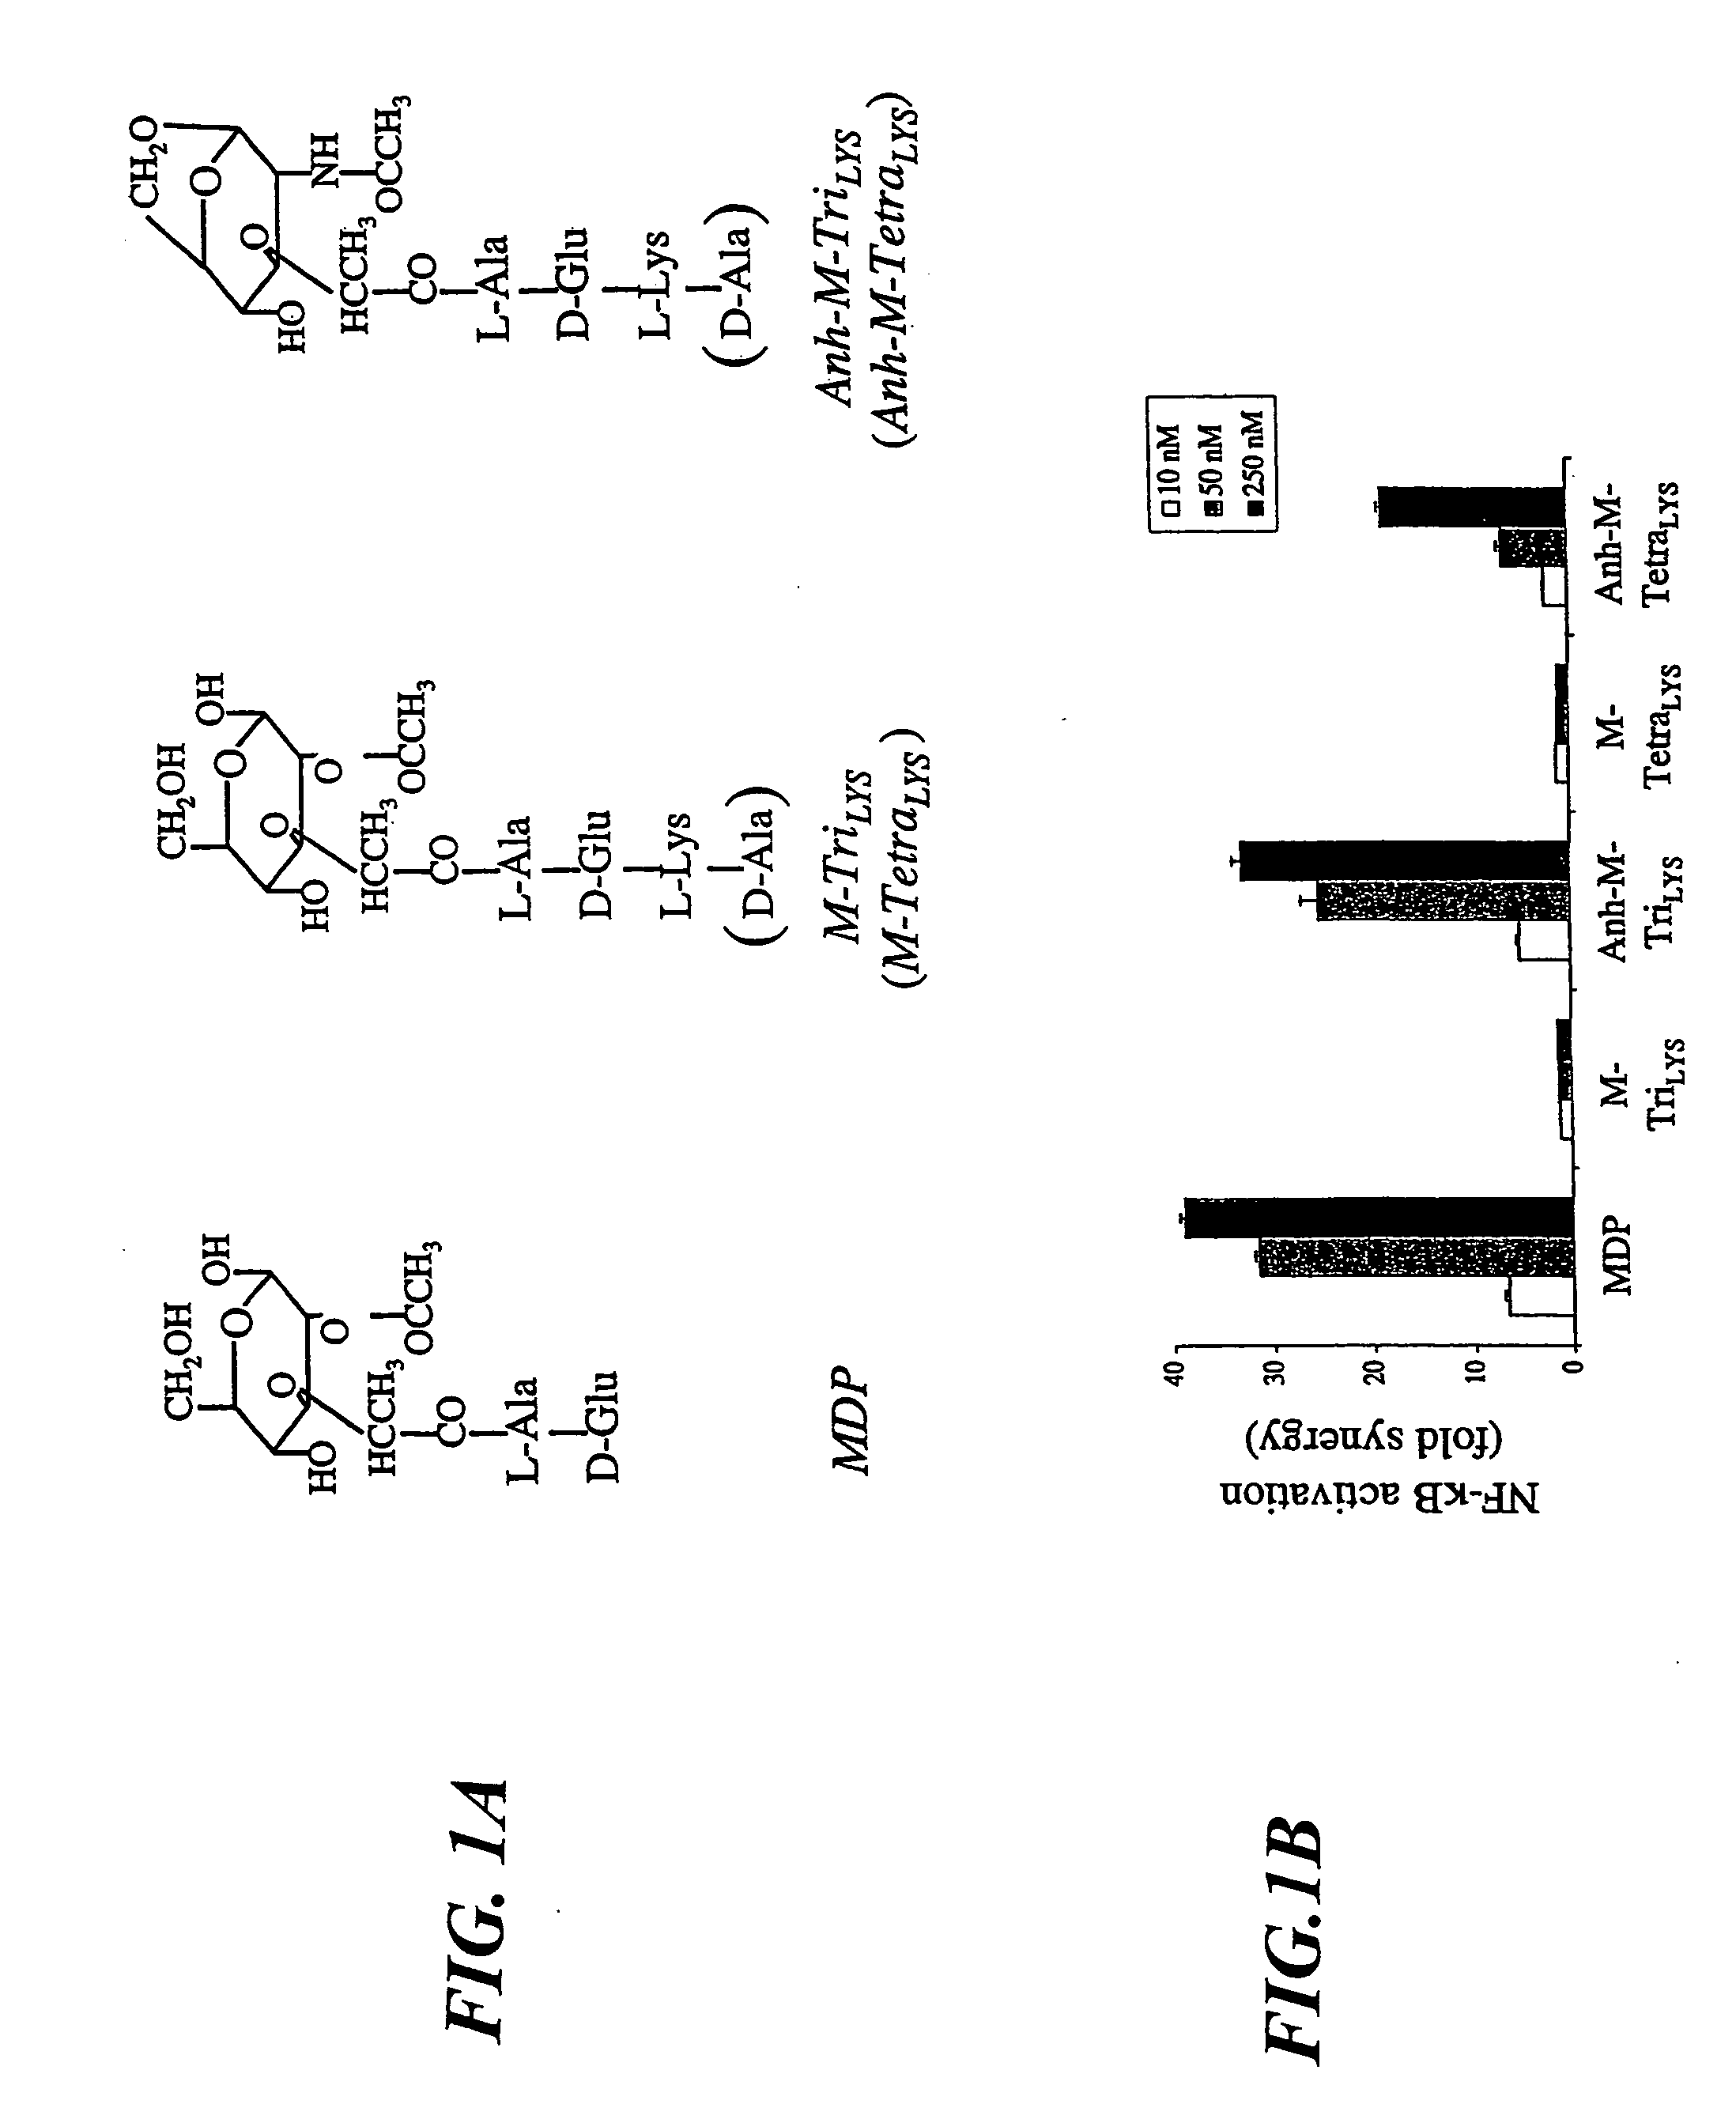 Method for screening molecules that restore NOD1 activity in cells containing an NOD2 mutation that reduces or eliminates NOD1 activity